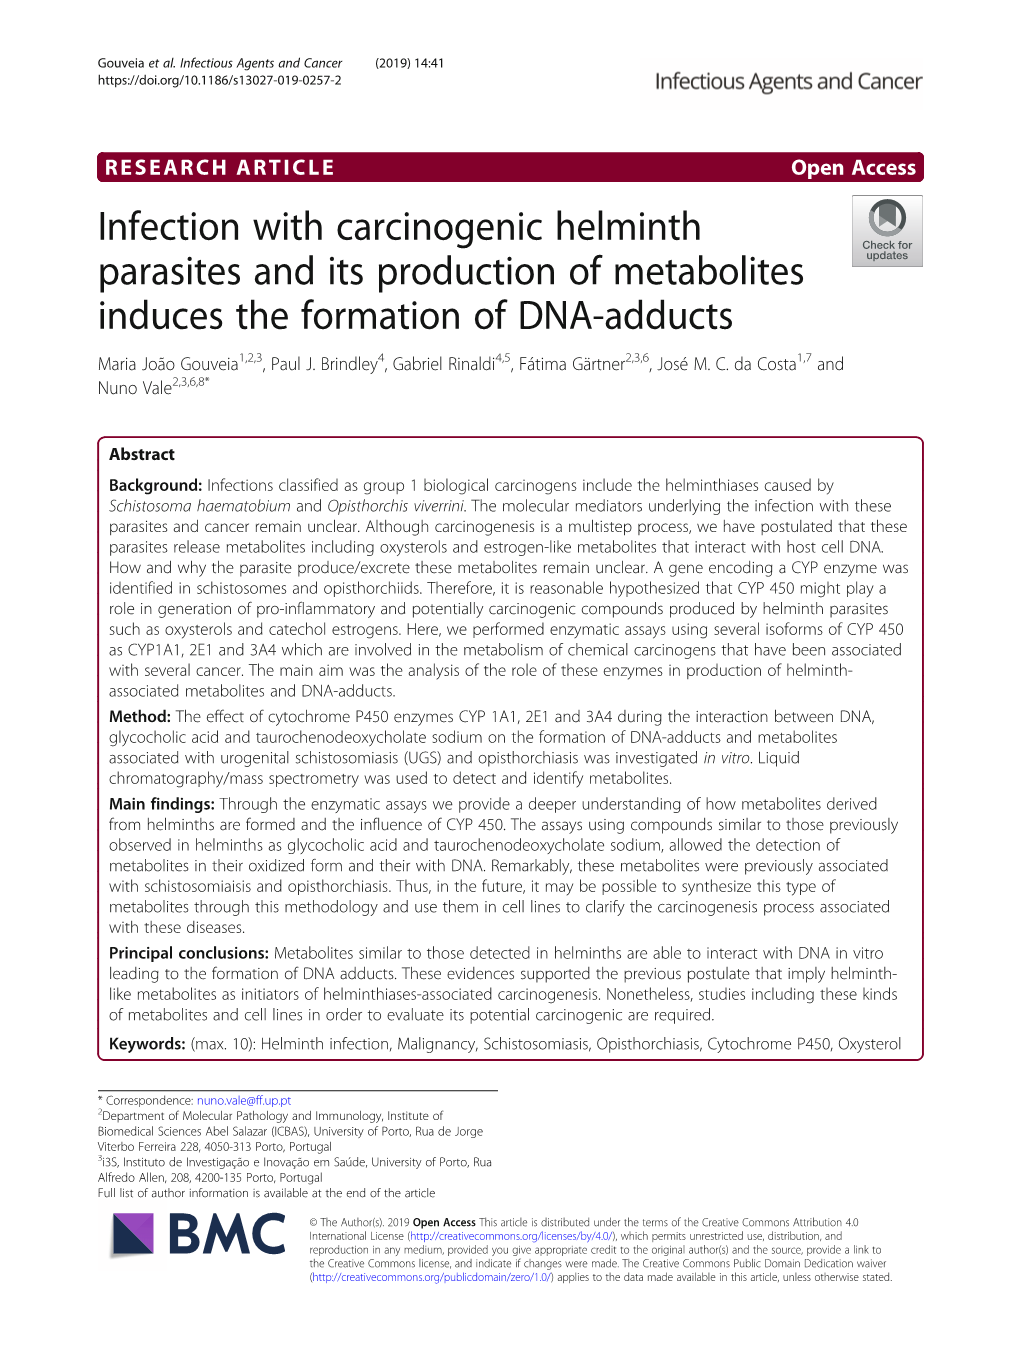 Infection with Carcinogenic Helminth Parasites and Its Production of Metabolites Induces the Formation of DNA-Adducts Maria João Gouveia1,2,3, Paul J